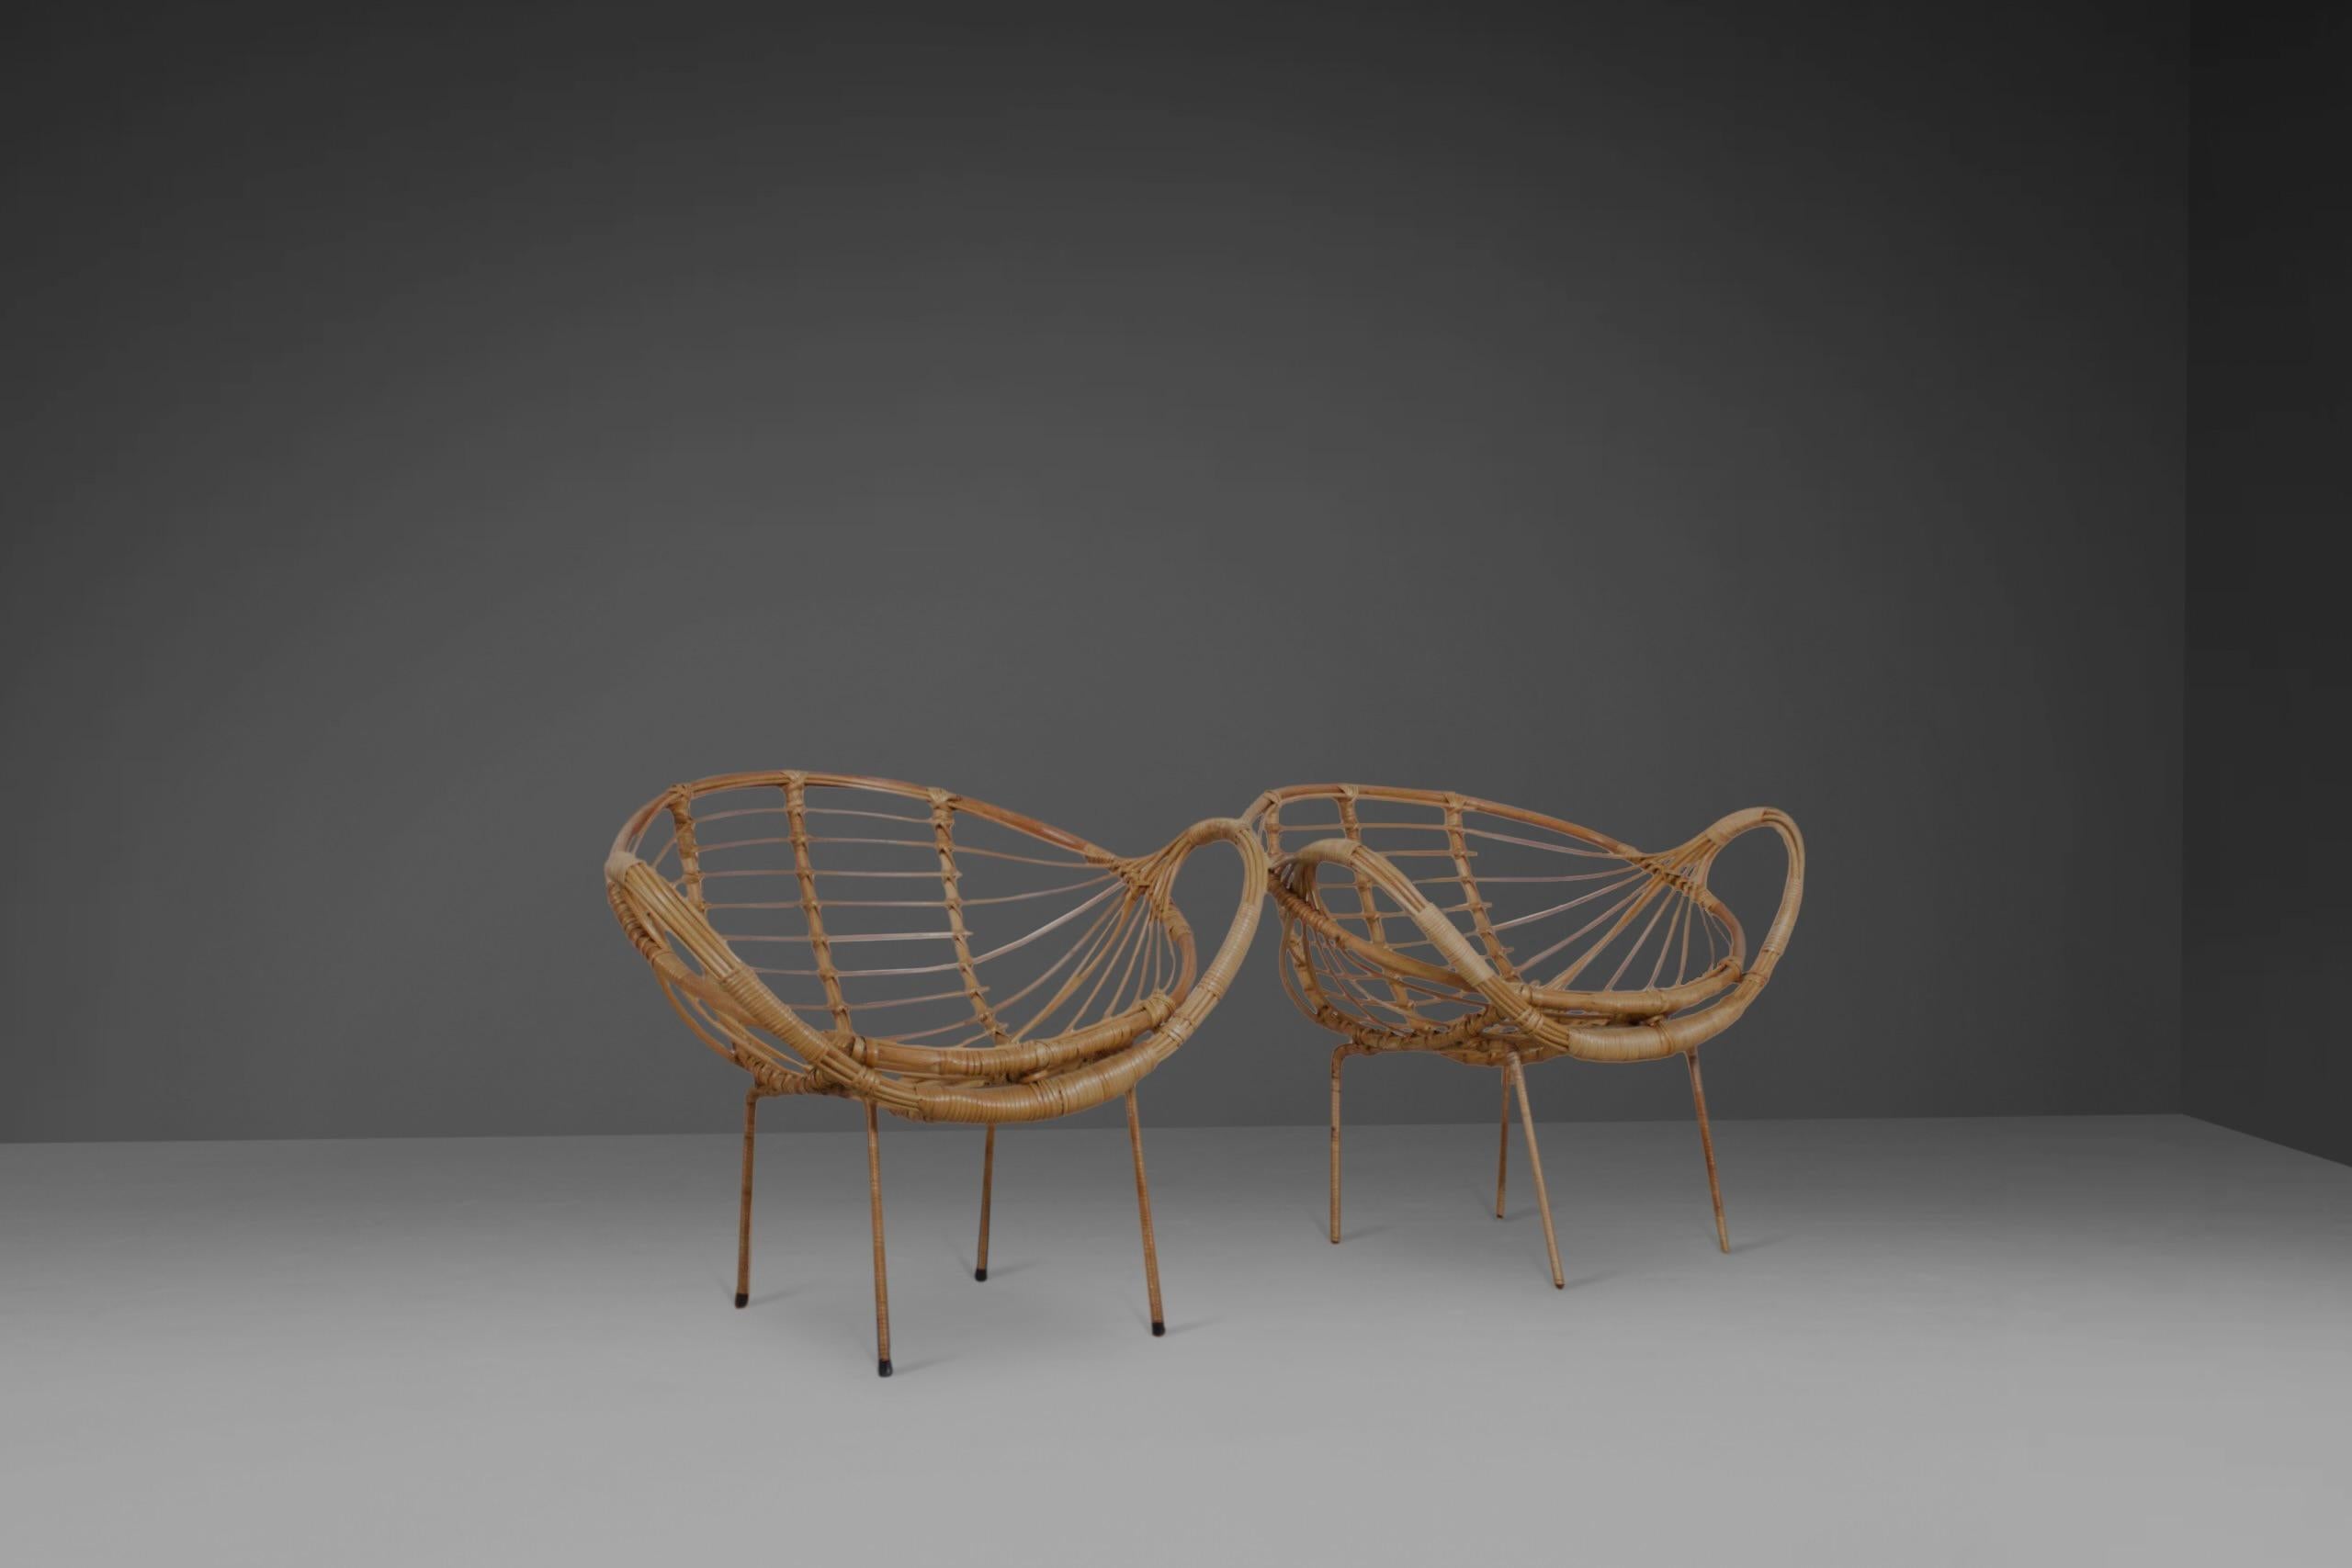 Set of sculptural rattan armchairs in very good condition.

The chairs have an elegant basket form seat and large rounded armrests.

The frame is made from steel and is covered in rattan.

The chairs have been fully restored by a rattan